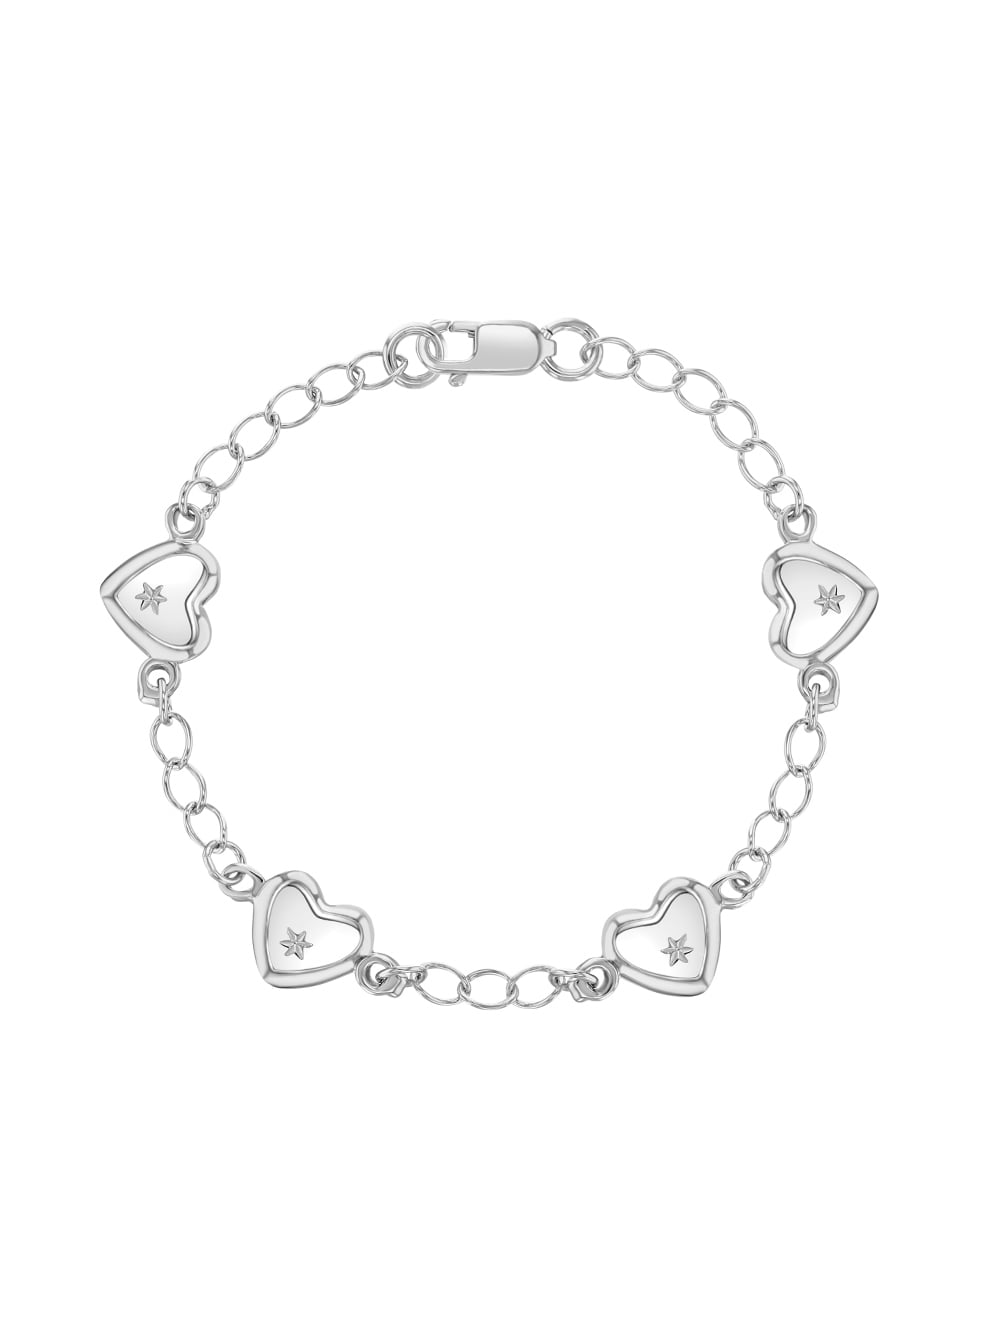 NEW Authentic Solid 925 Sterling Silver Childs ID Bracelet With Two Heart Motifs 